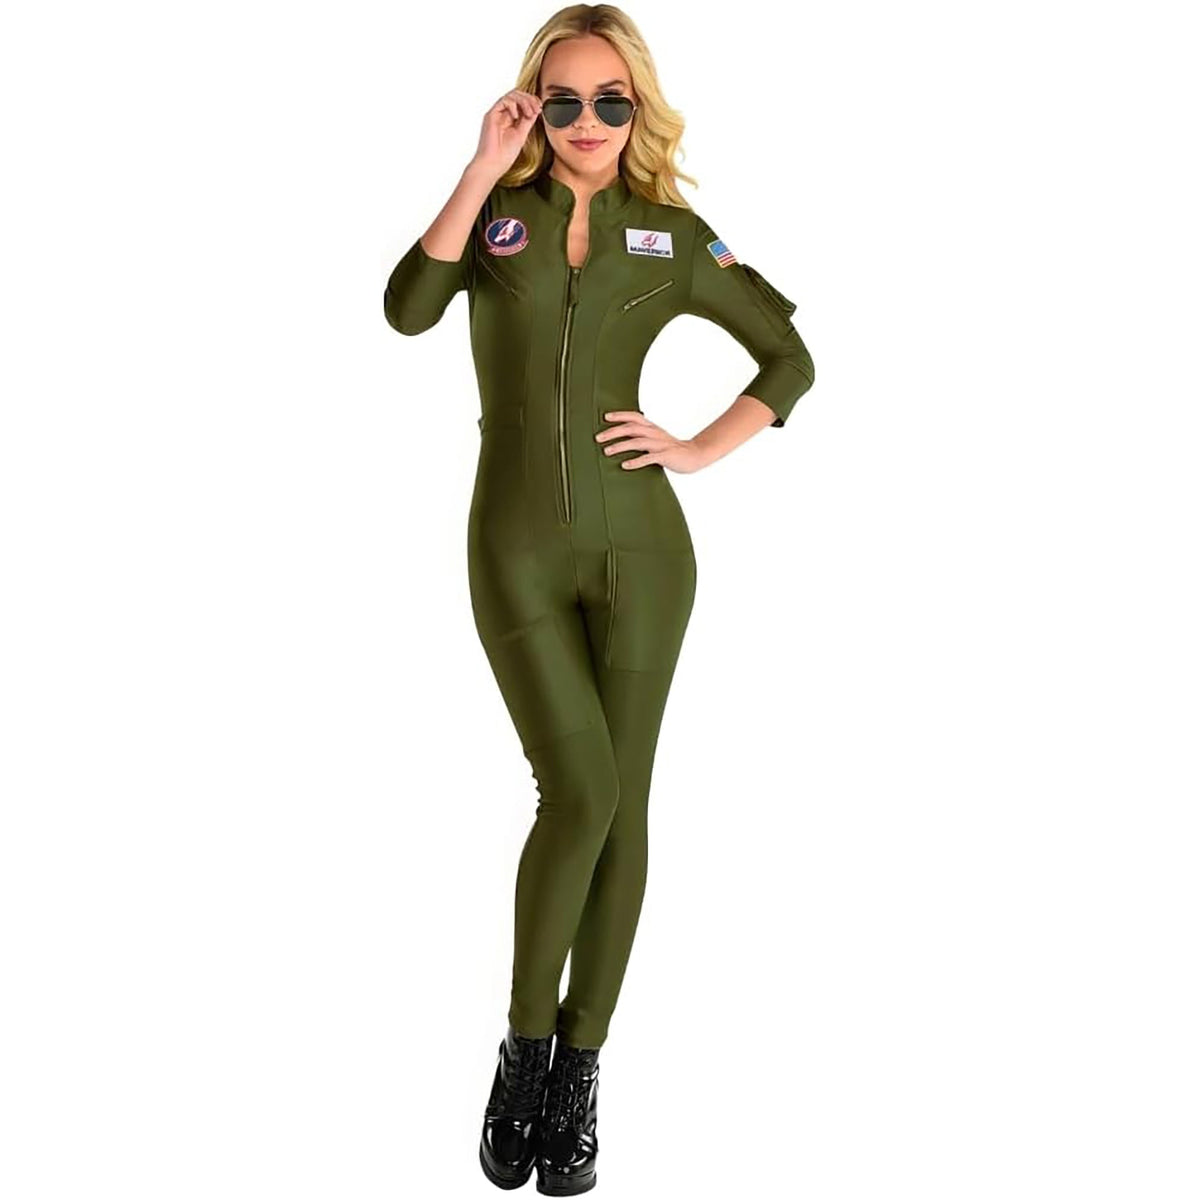 SUIT YOURSELF COSTUME CO. Costumes Flight Costume for Adults, Top Gun Maverick